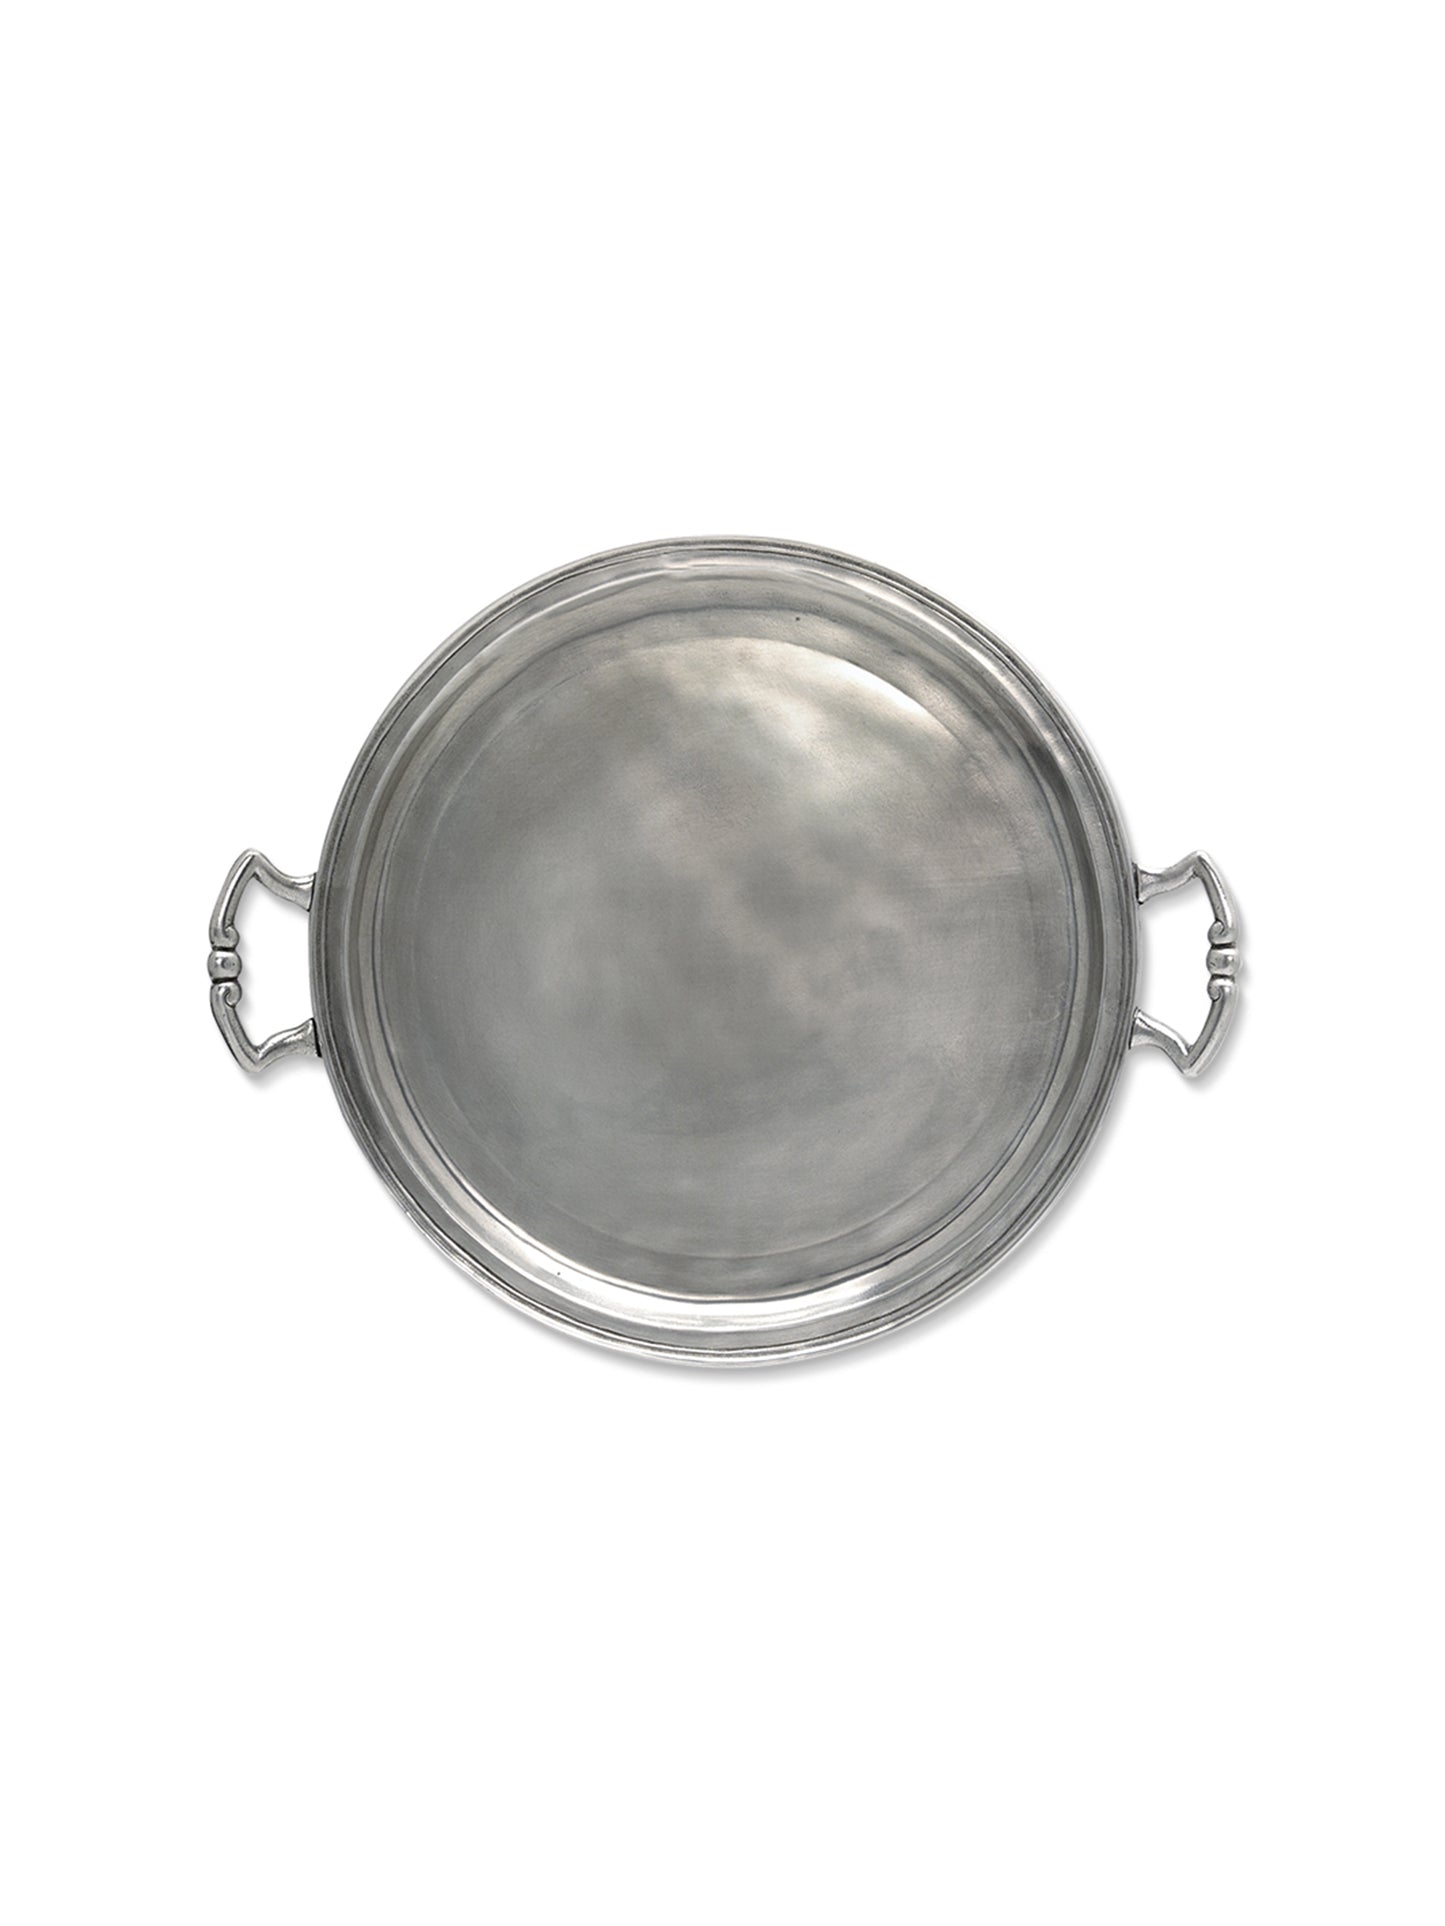 MATCH Pewter Round Tray with Handles Weston Table